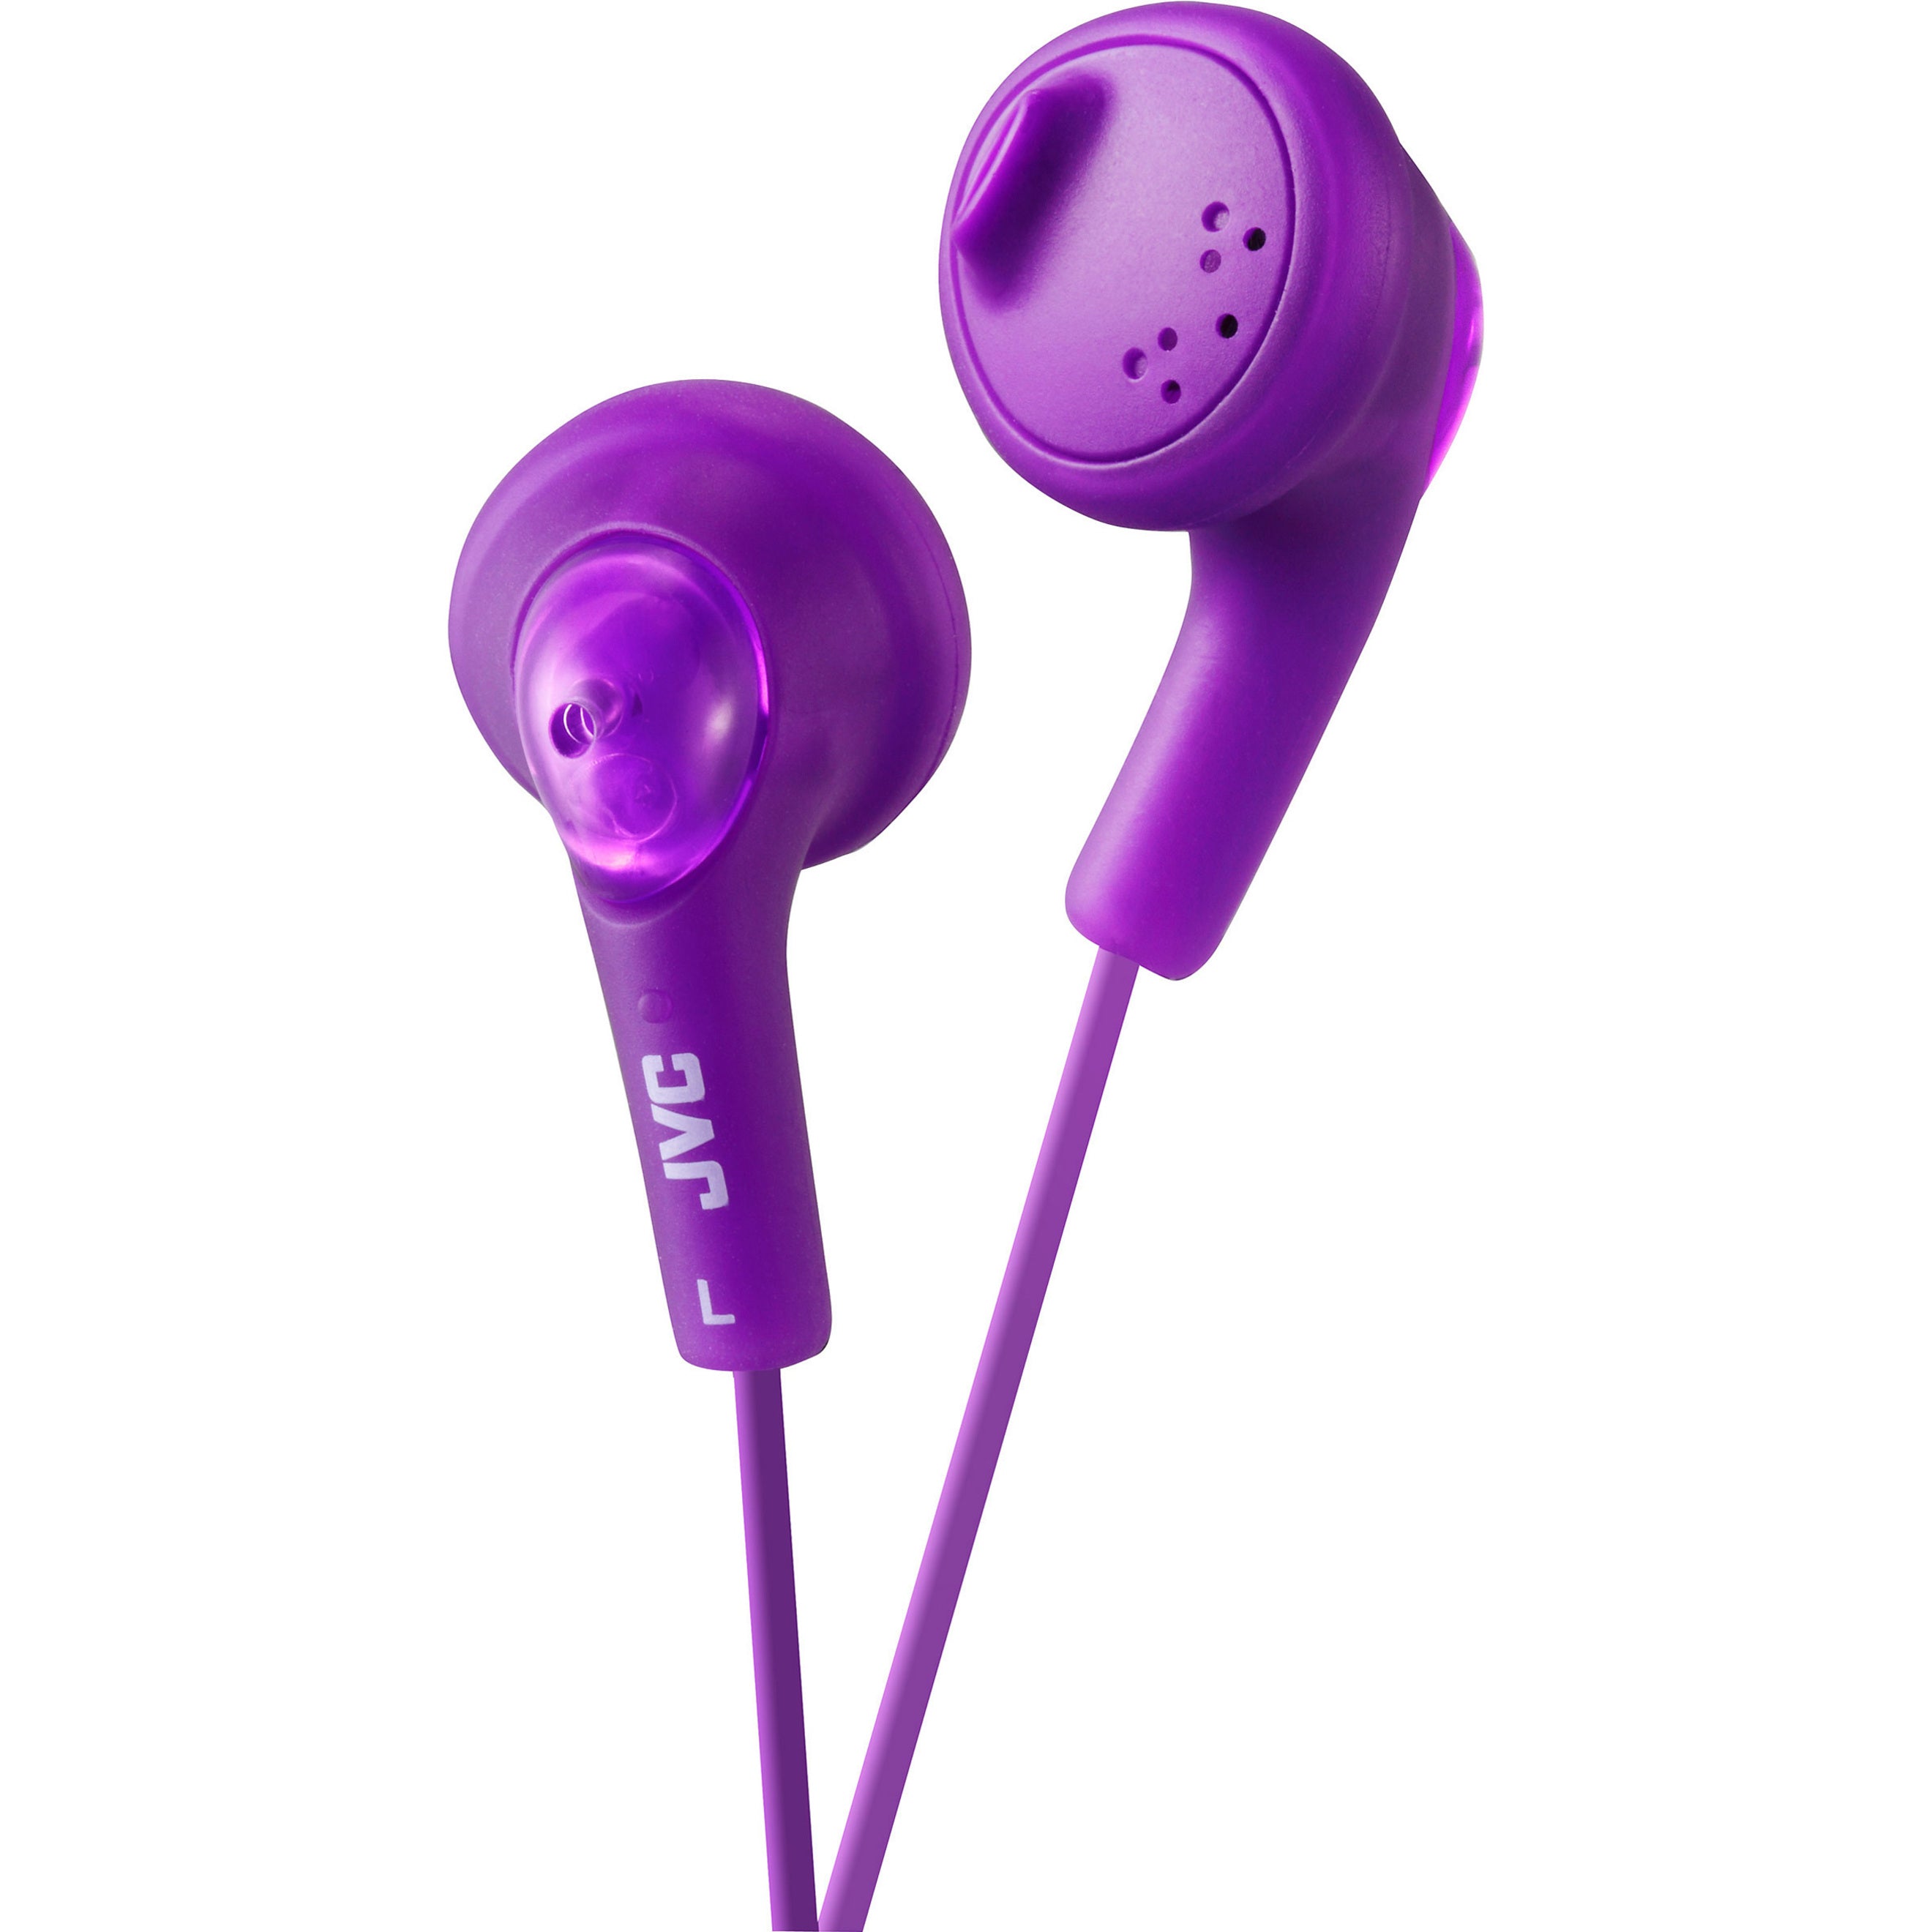 JVC HA-F160-V Gumy Earphone, Violet, Bass Boost, Tangle Resistant Cable